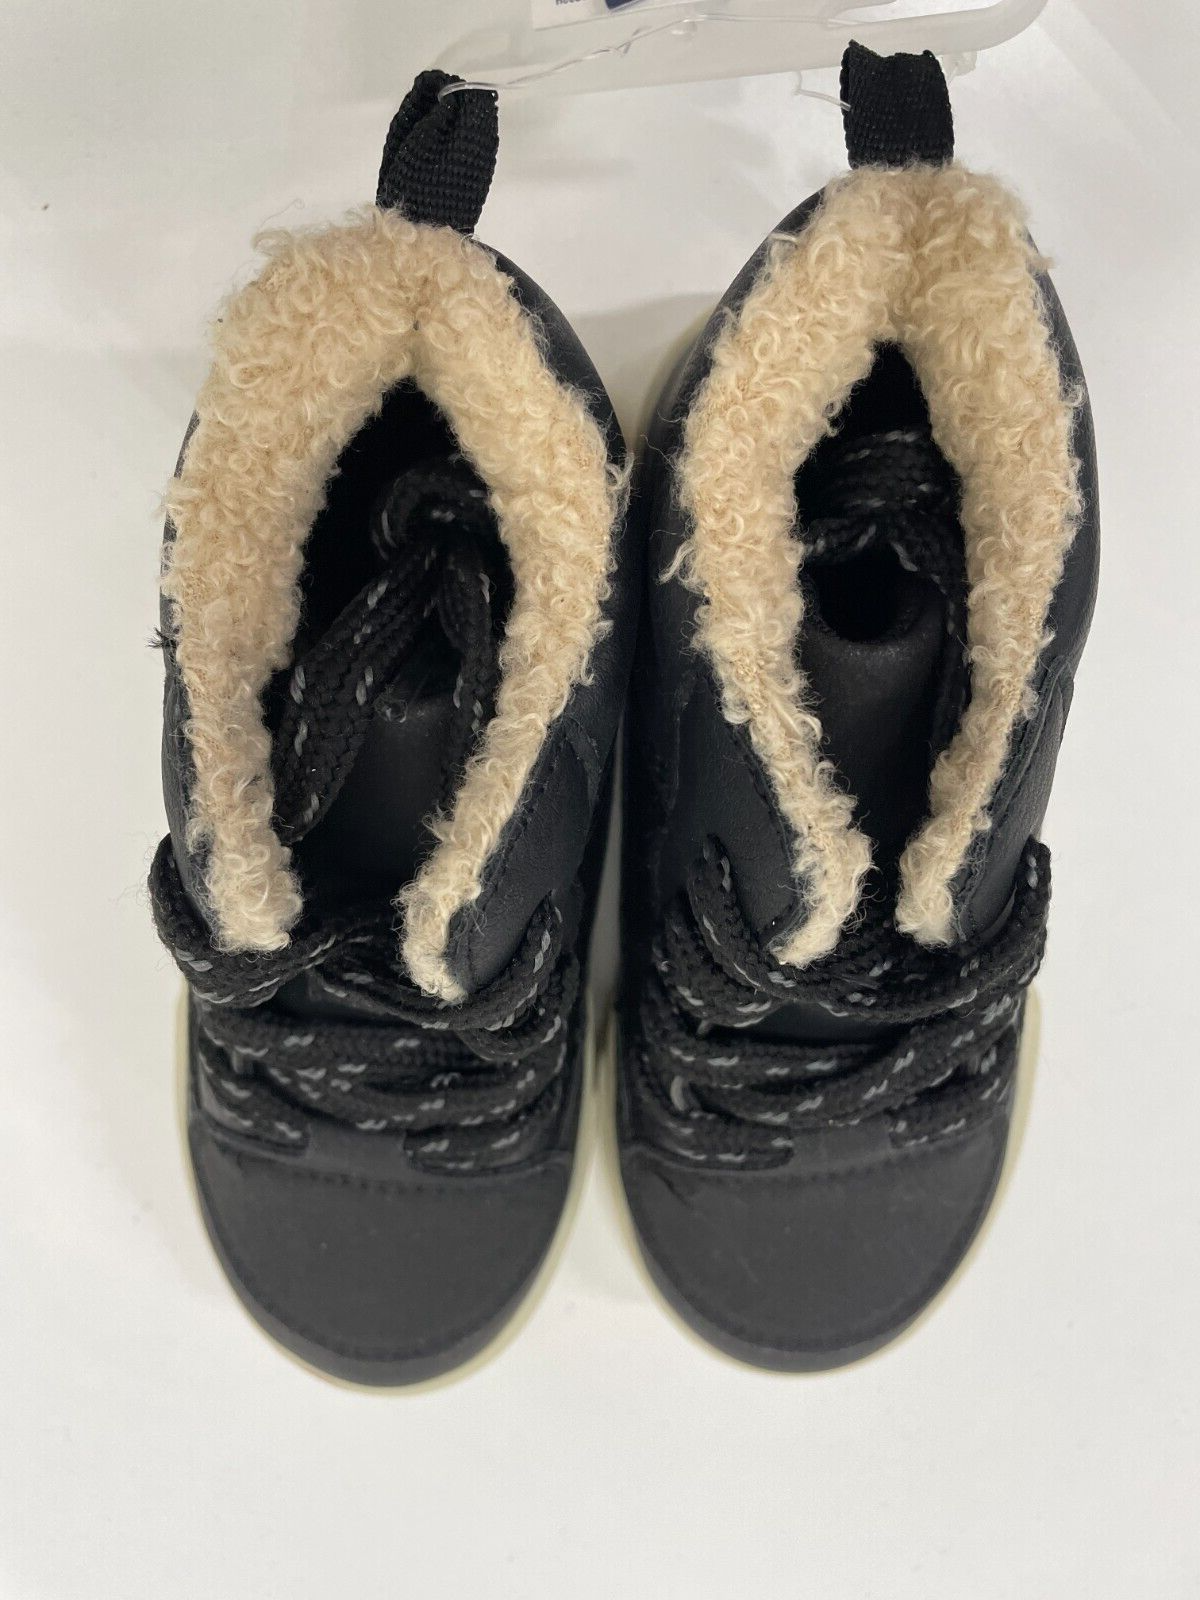 OshKosh B'gosh Toddler 9 Sherpa Detail Lace-Up Sneakers Black Faux Leather NEW